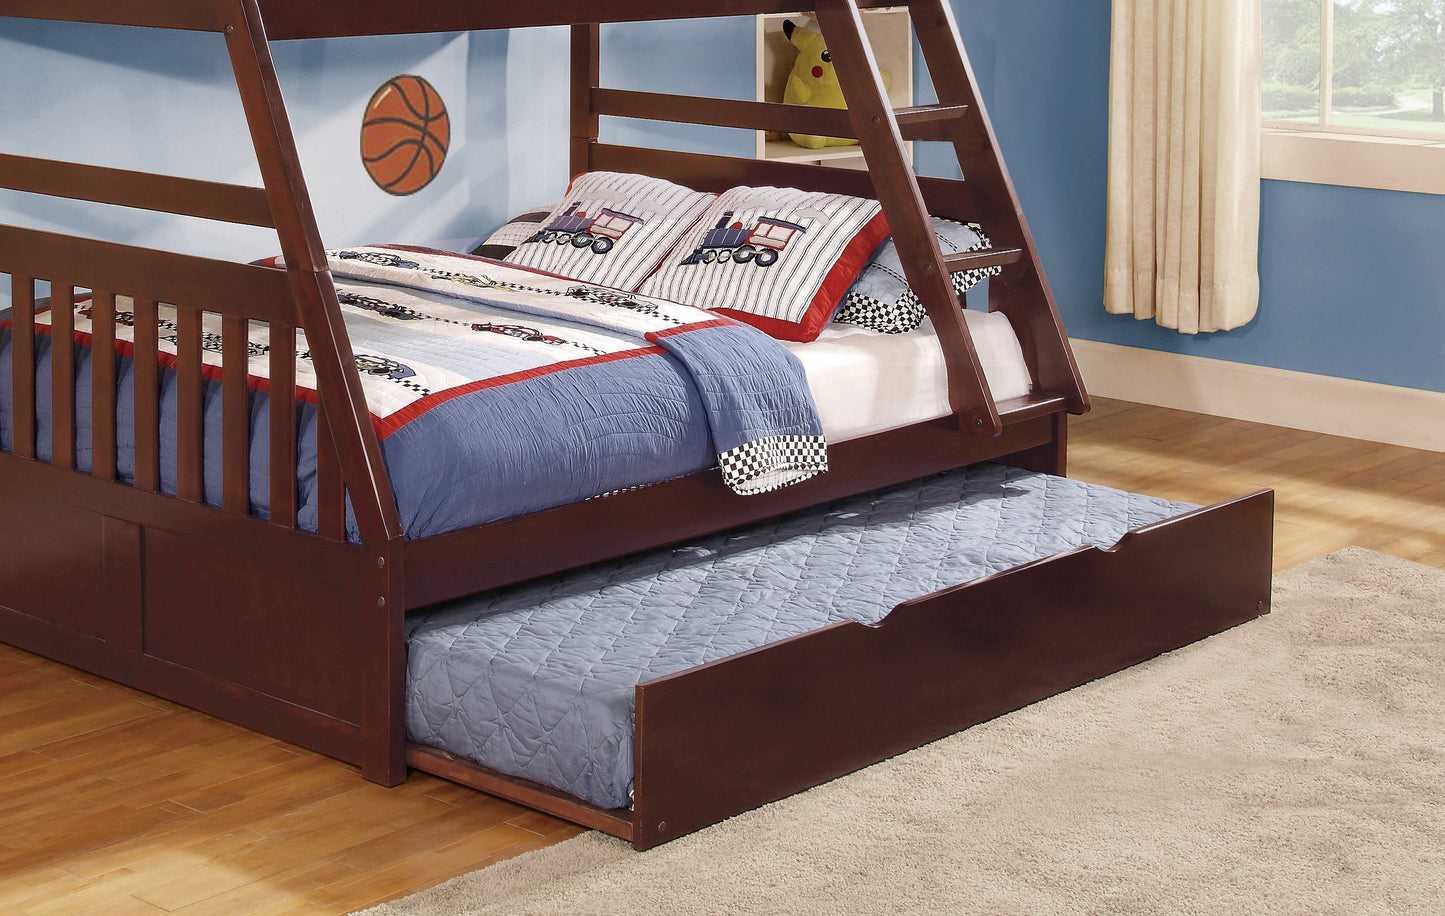 1pc Twin/Full Bunk Bed with Twin Trundle Dark Cherry Finish Wooden Bedroom Furniture - Enova Luxe Home Store